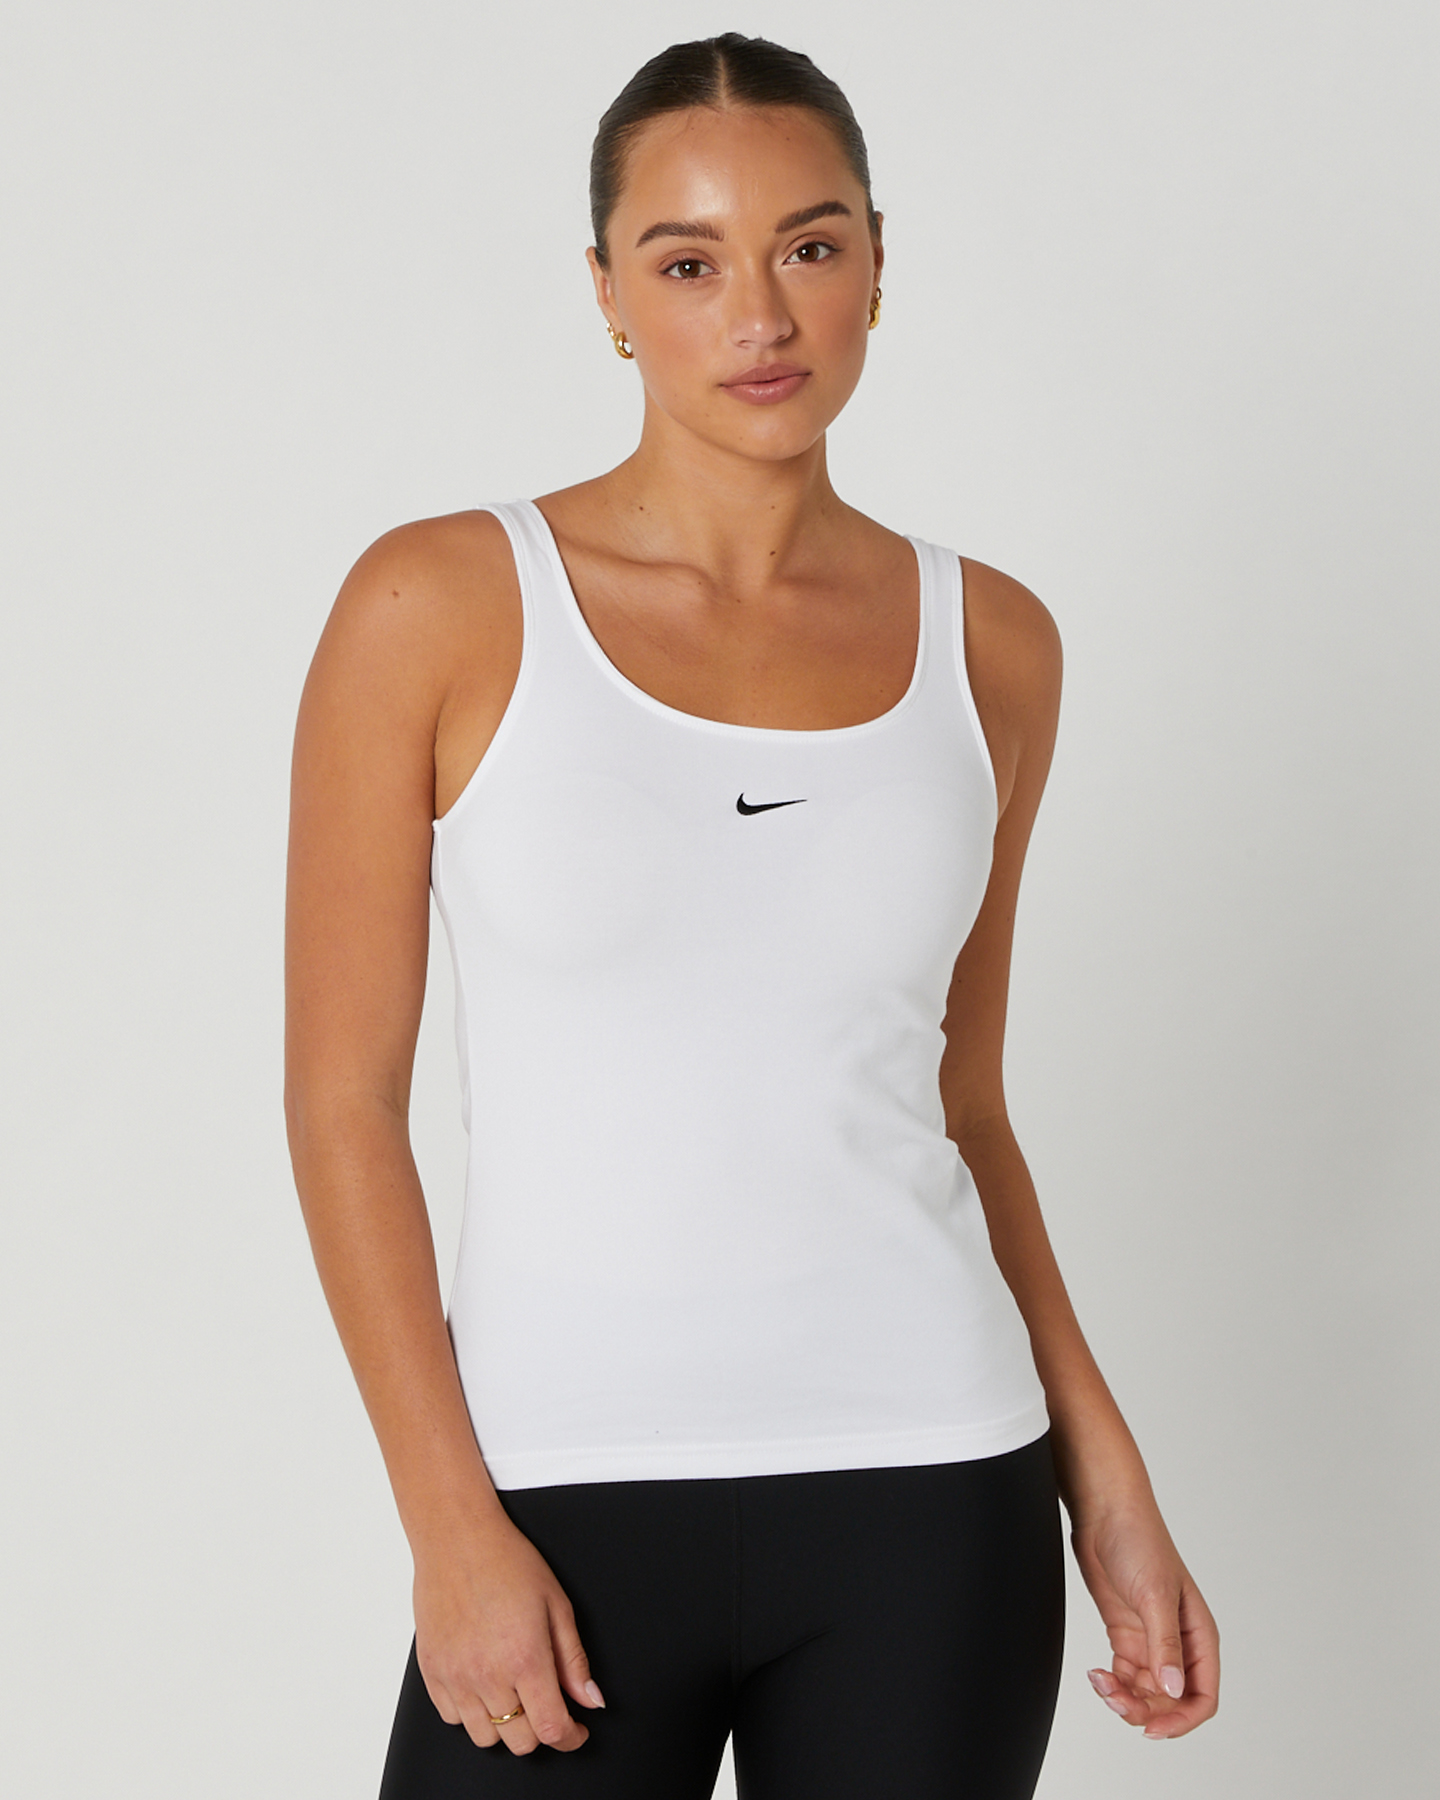 https://content.surfstitch.com/image/upload/v1683707464/DH1345-100/WHITE-BLACK-WOMENS-ACTIVEWEAR-NIKE-TOPS-DH1345-100_1.JPG